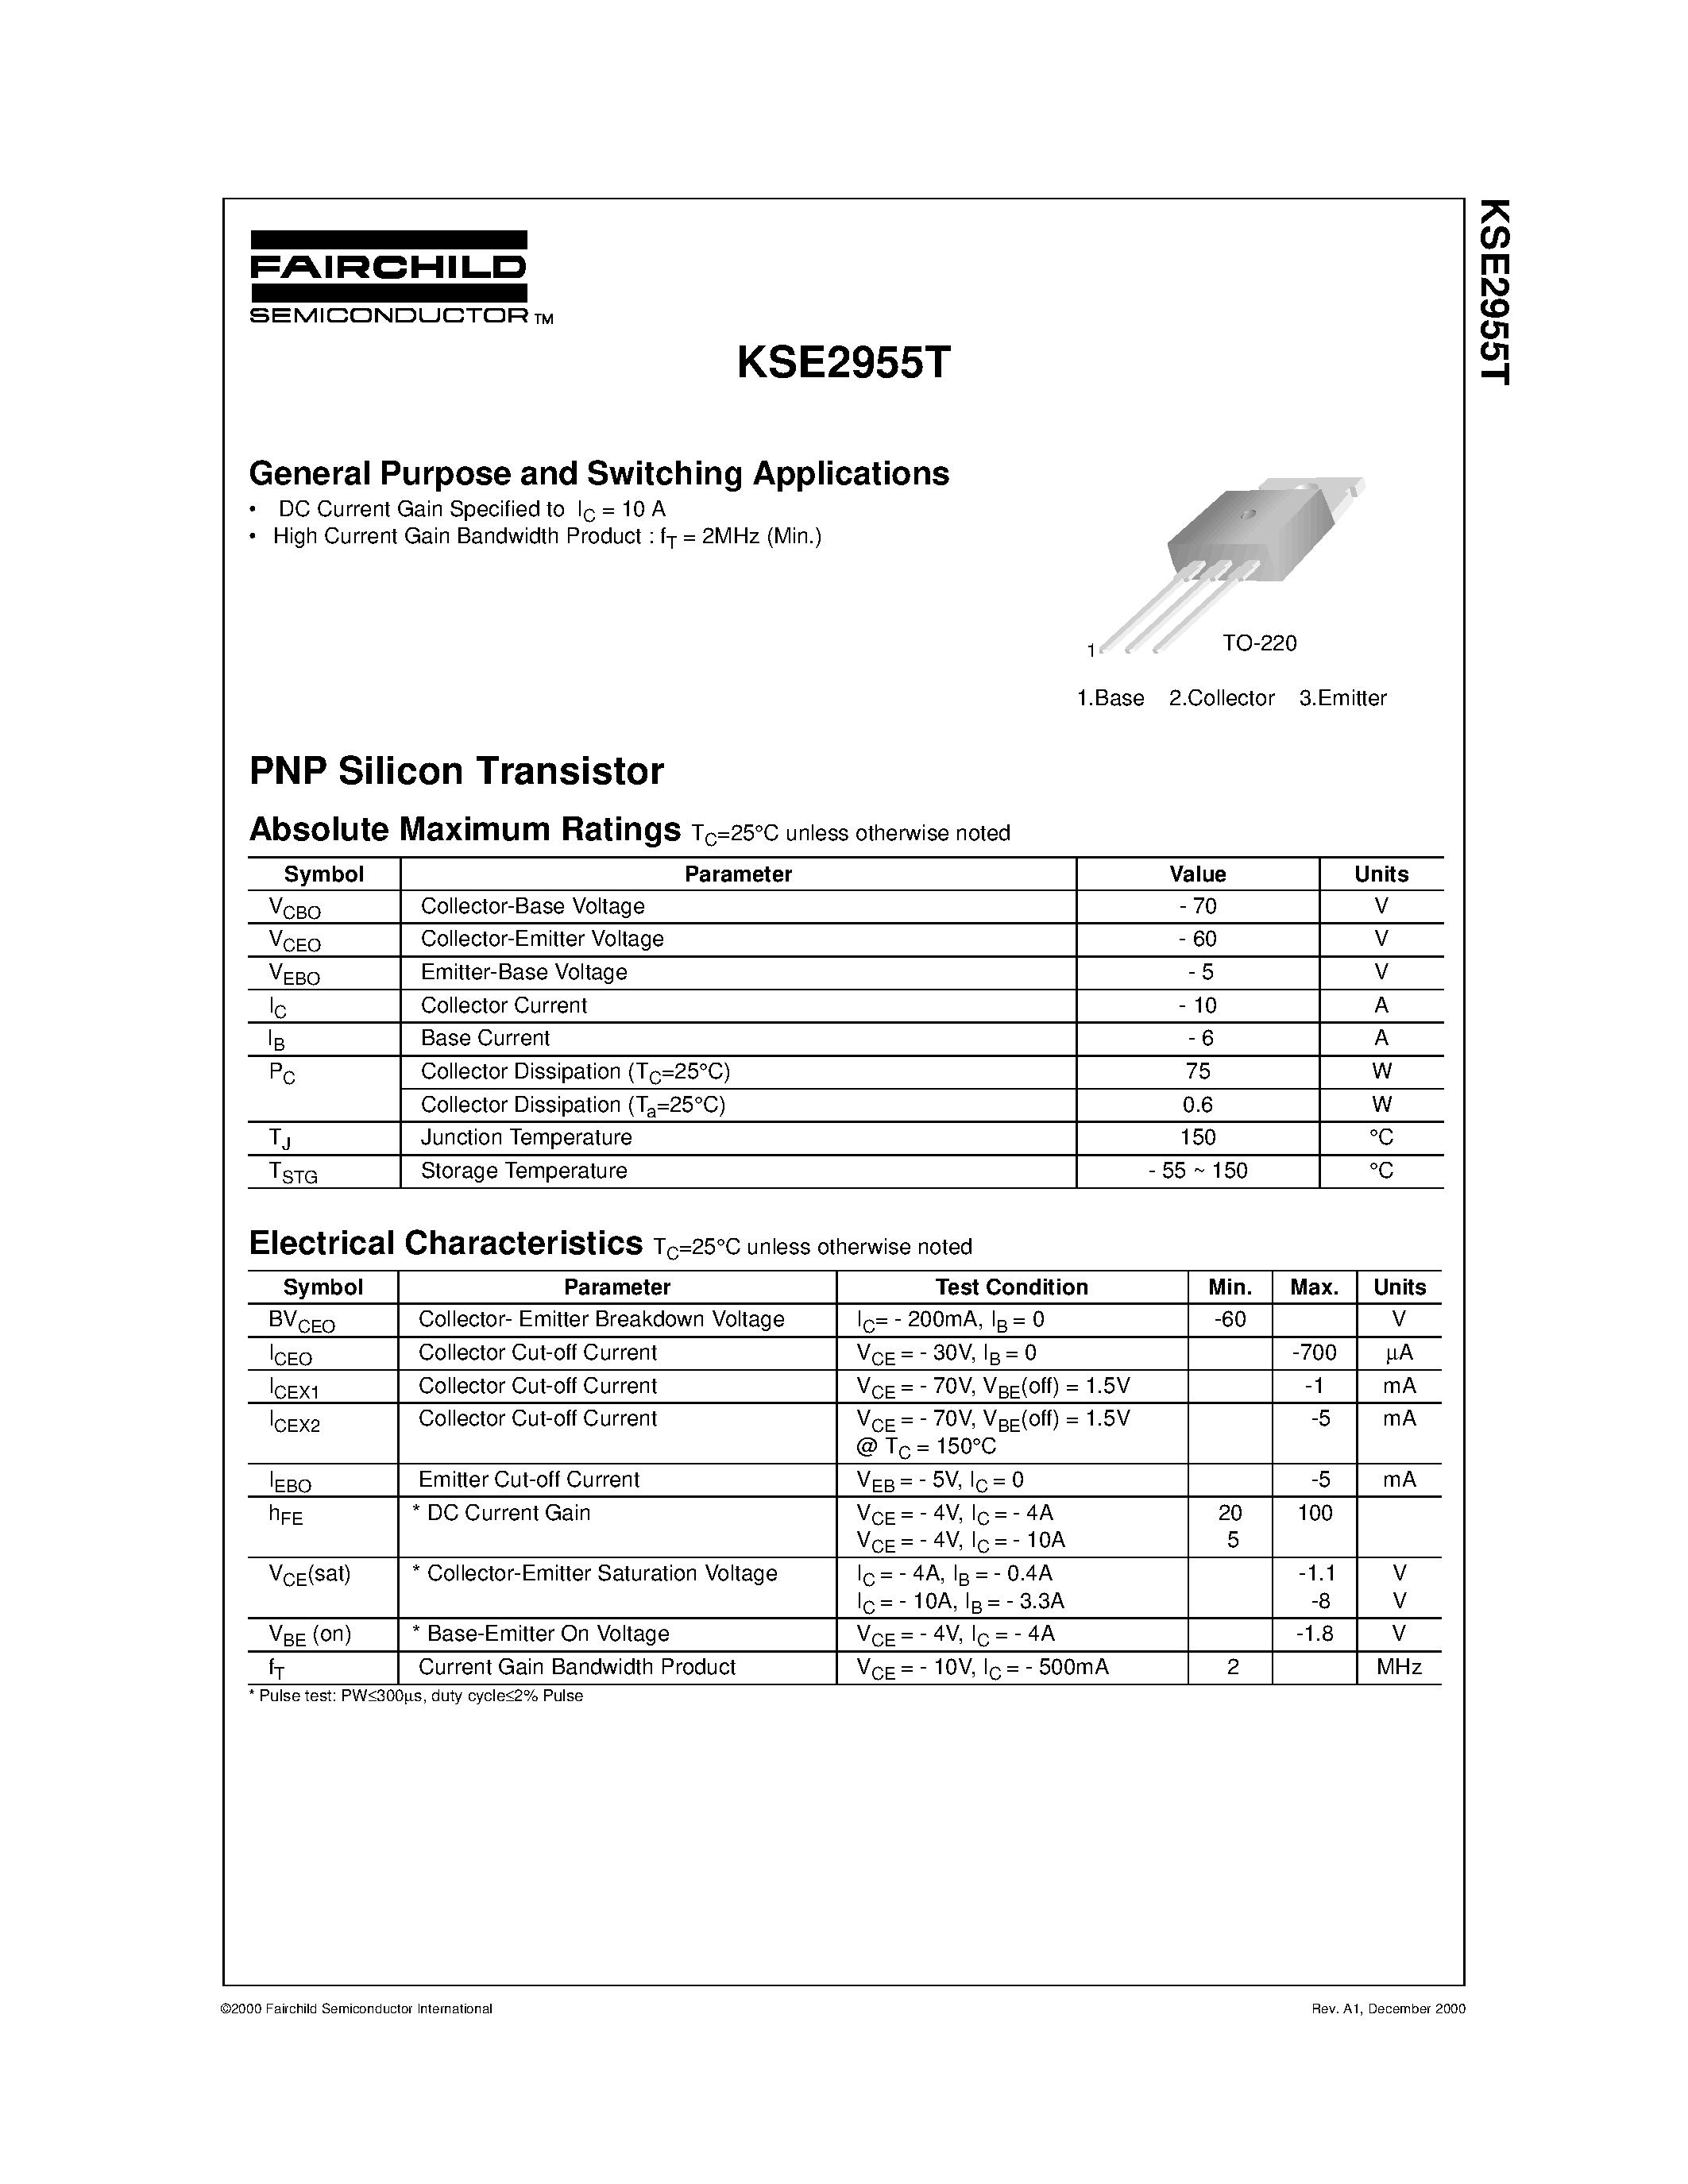 Datasheet KSE2955T - General Purpose and Switching Applications page 1